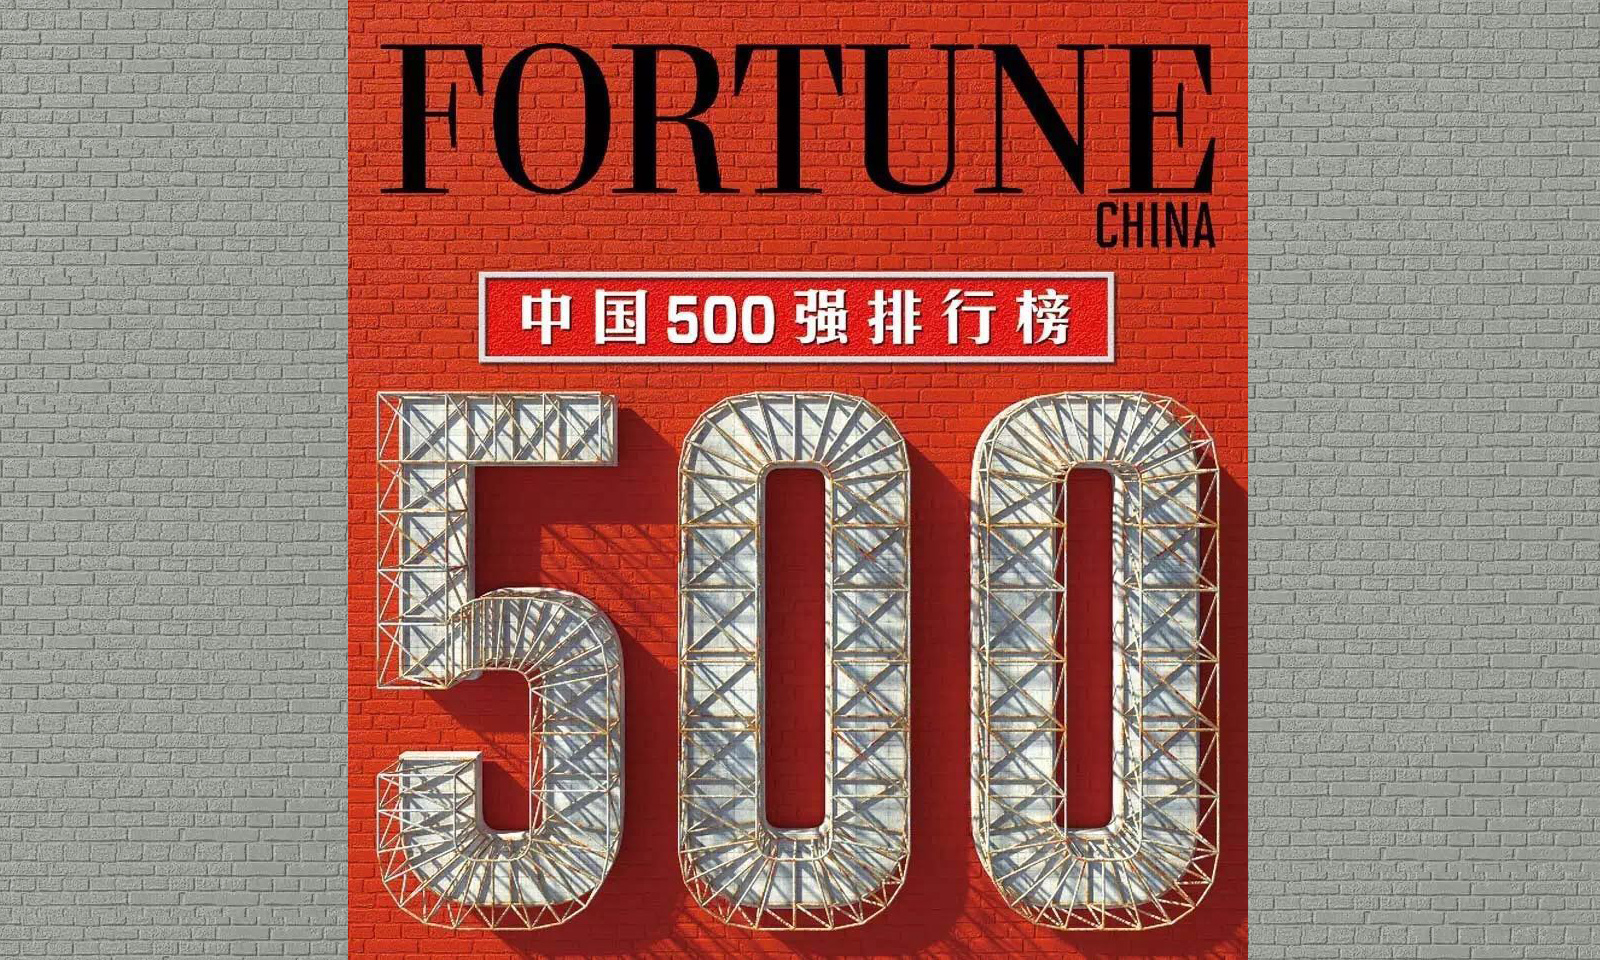 2016 china's top 500 listed companies announced by fortune：xiamen c&d inc. ranks no.45